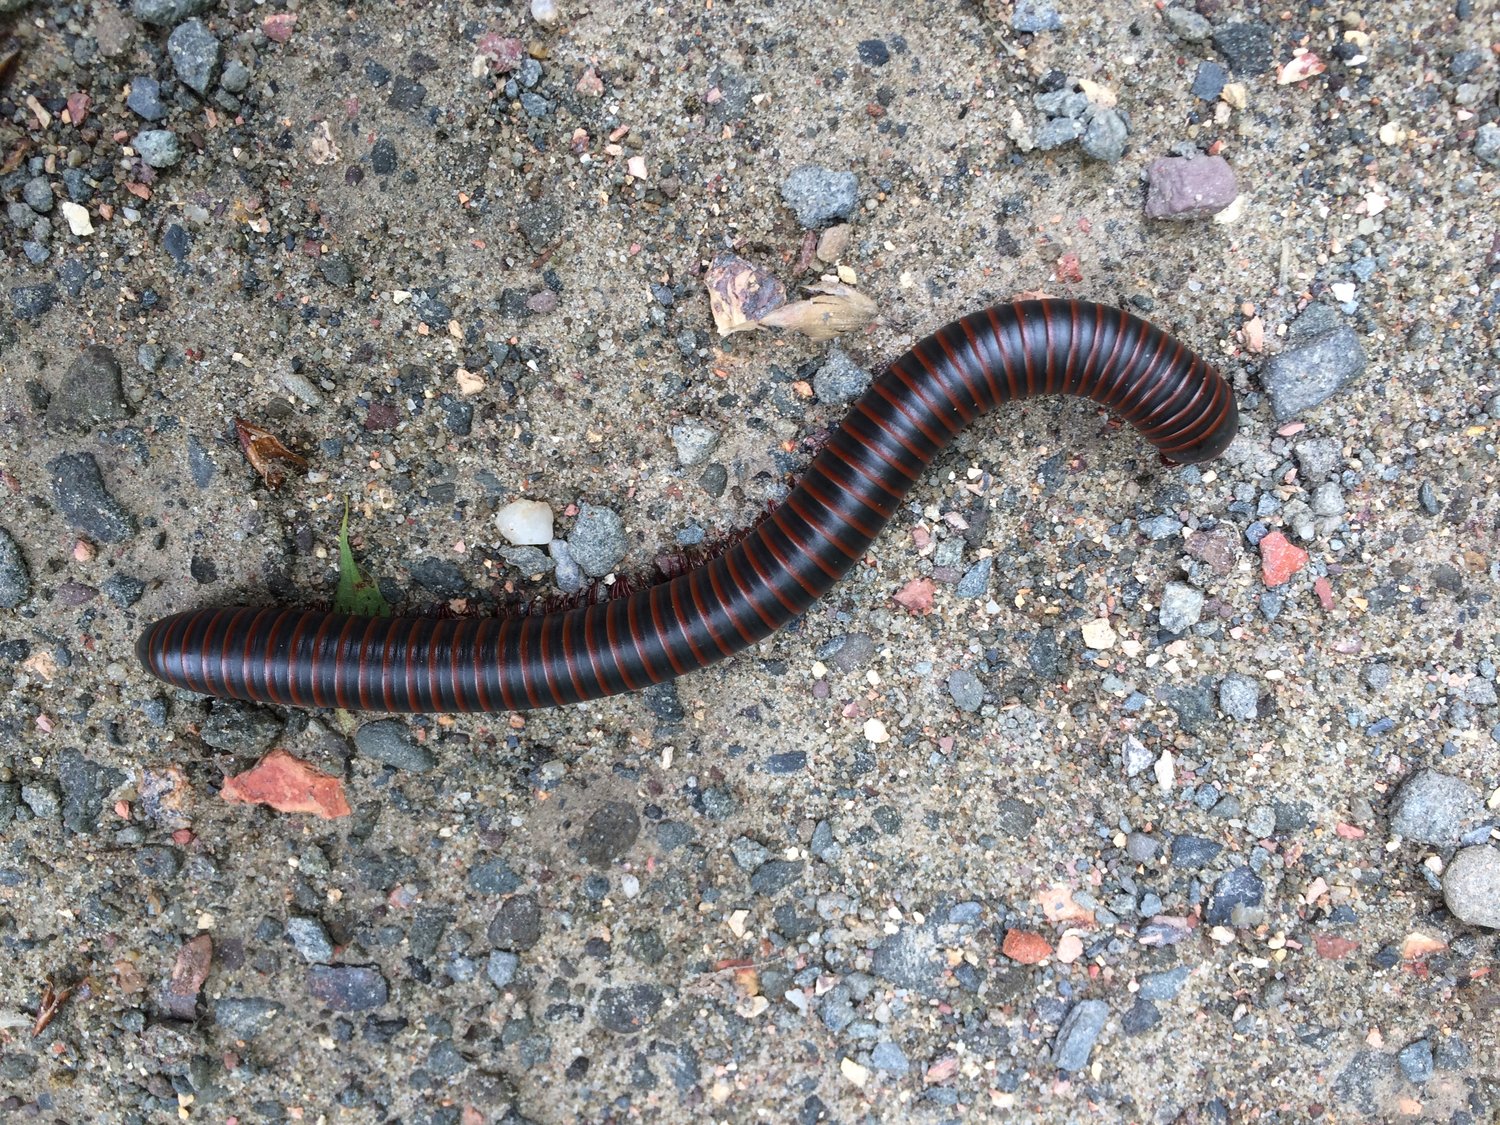 The Pennsylvania Parks and Forests Foundation’s annual “Parks and Forests Thru the Seasons” photo contest encourages capturing “all that is special and the memories that are made” in the state’s parks and forests. Send your “Dogs in the Outdoors” submissions, or submit your best shot of the wildlife we share our state lands with, like this multi-legged millipede. This contest also has a category for youth photographers between 12 and 17 years of age. Learn more at www.paparksandforests.org/get-involved/photo-contest.